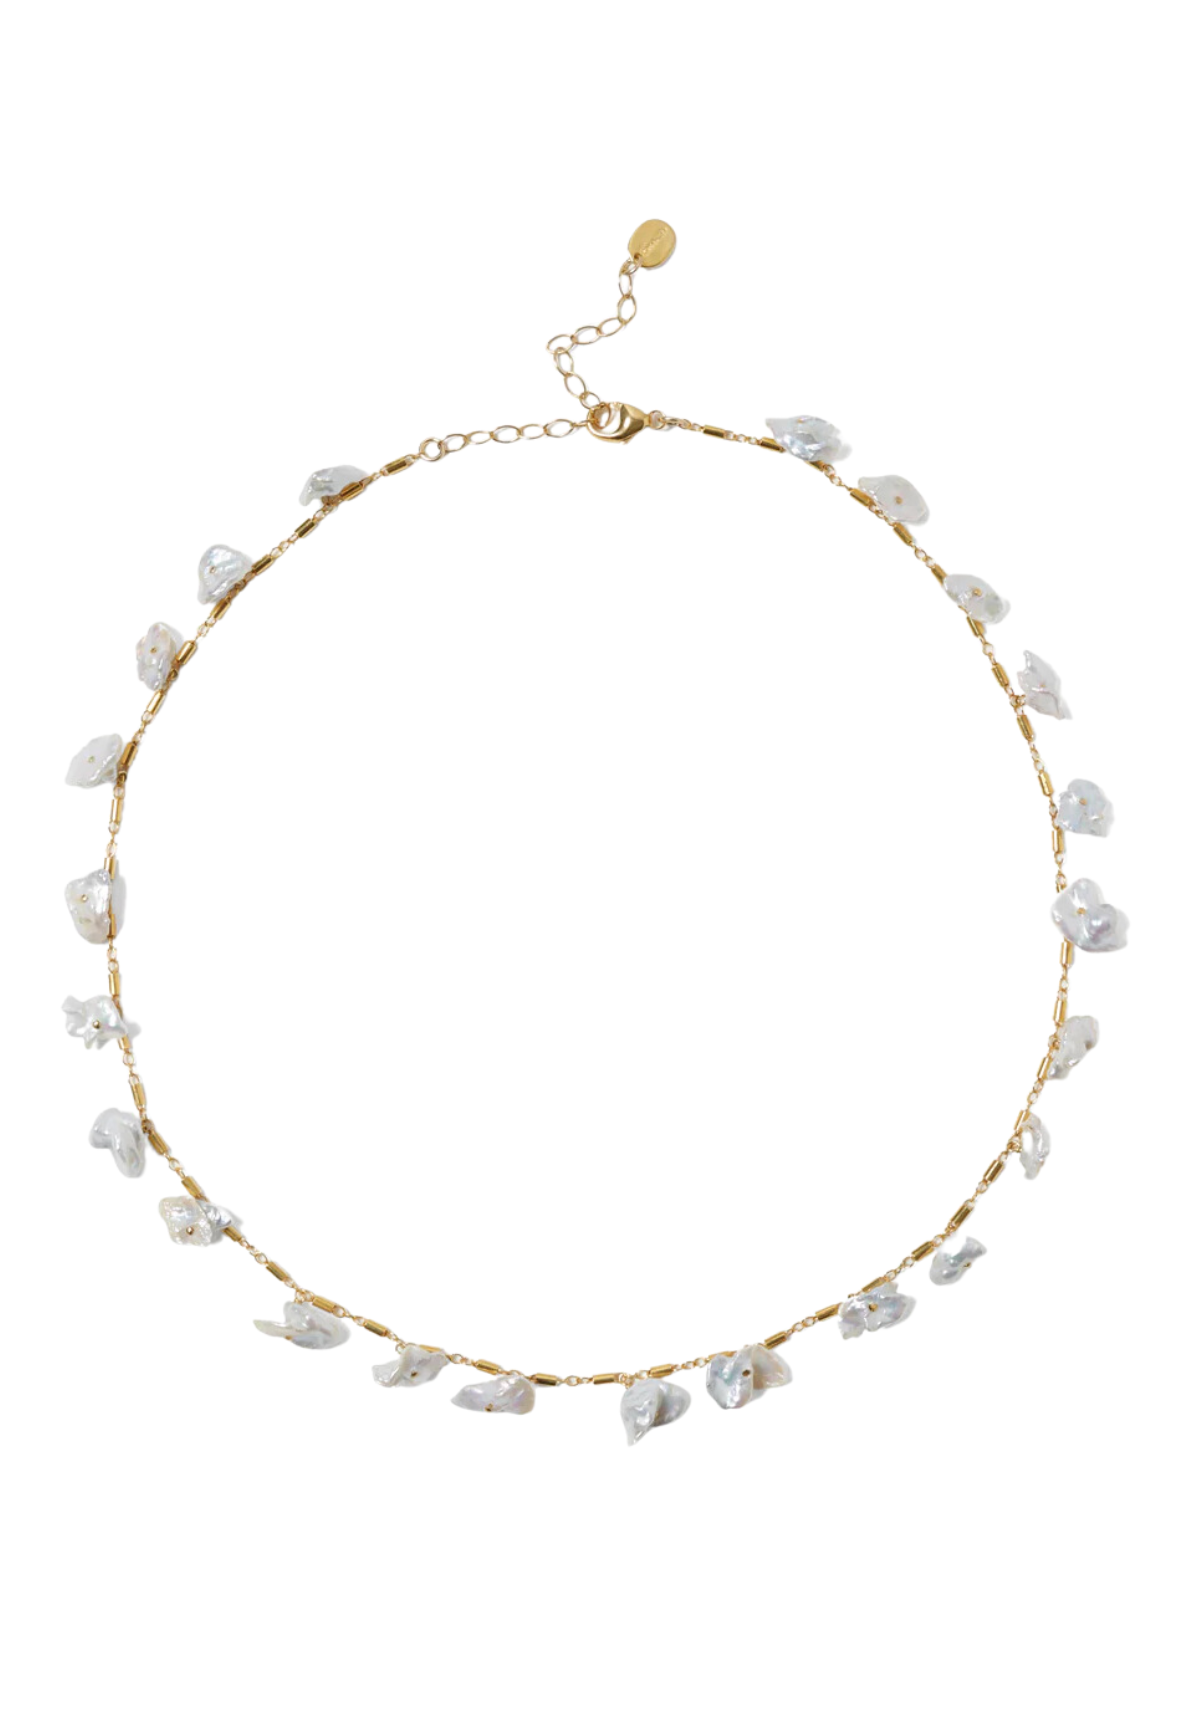 Arya Necklace White Pearl